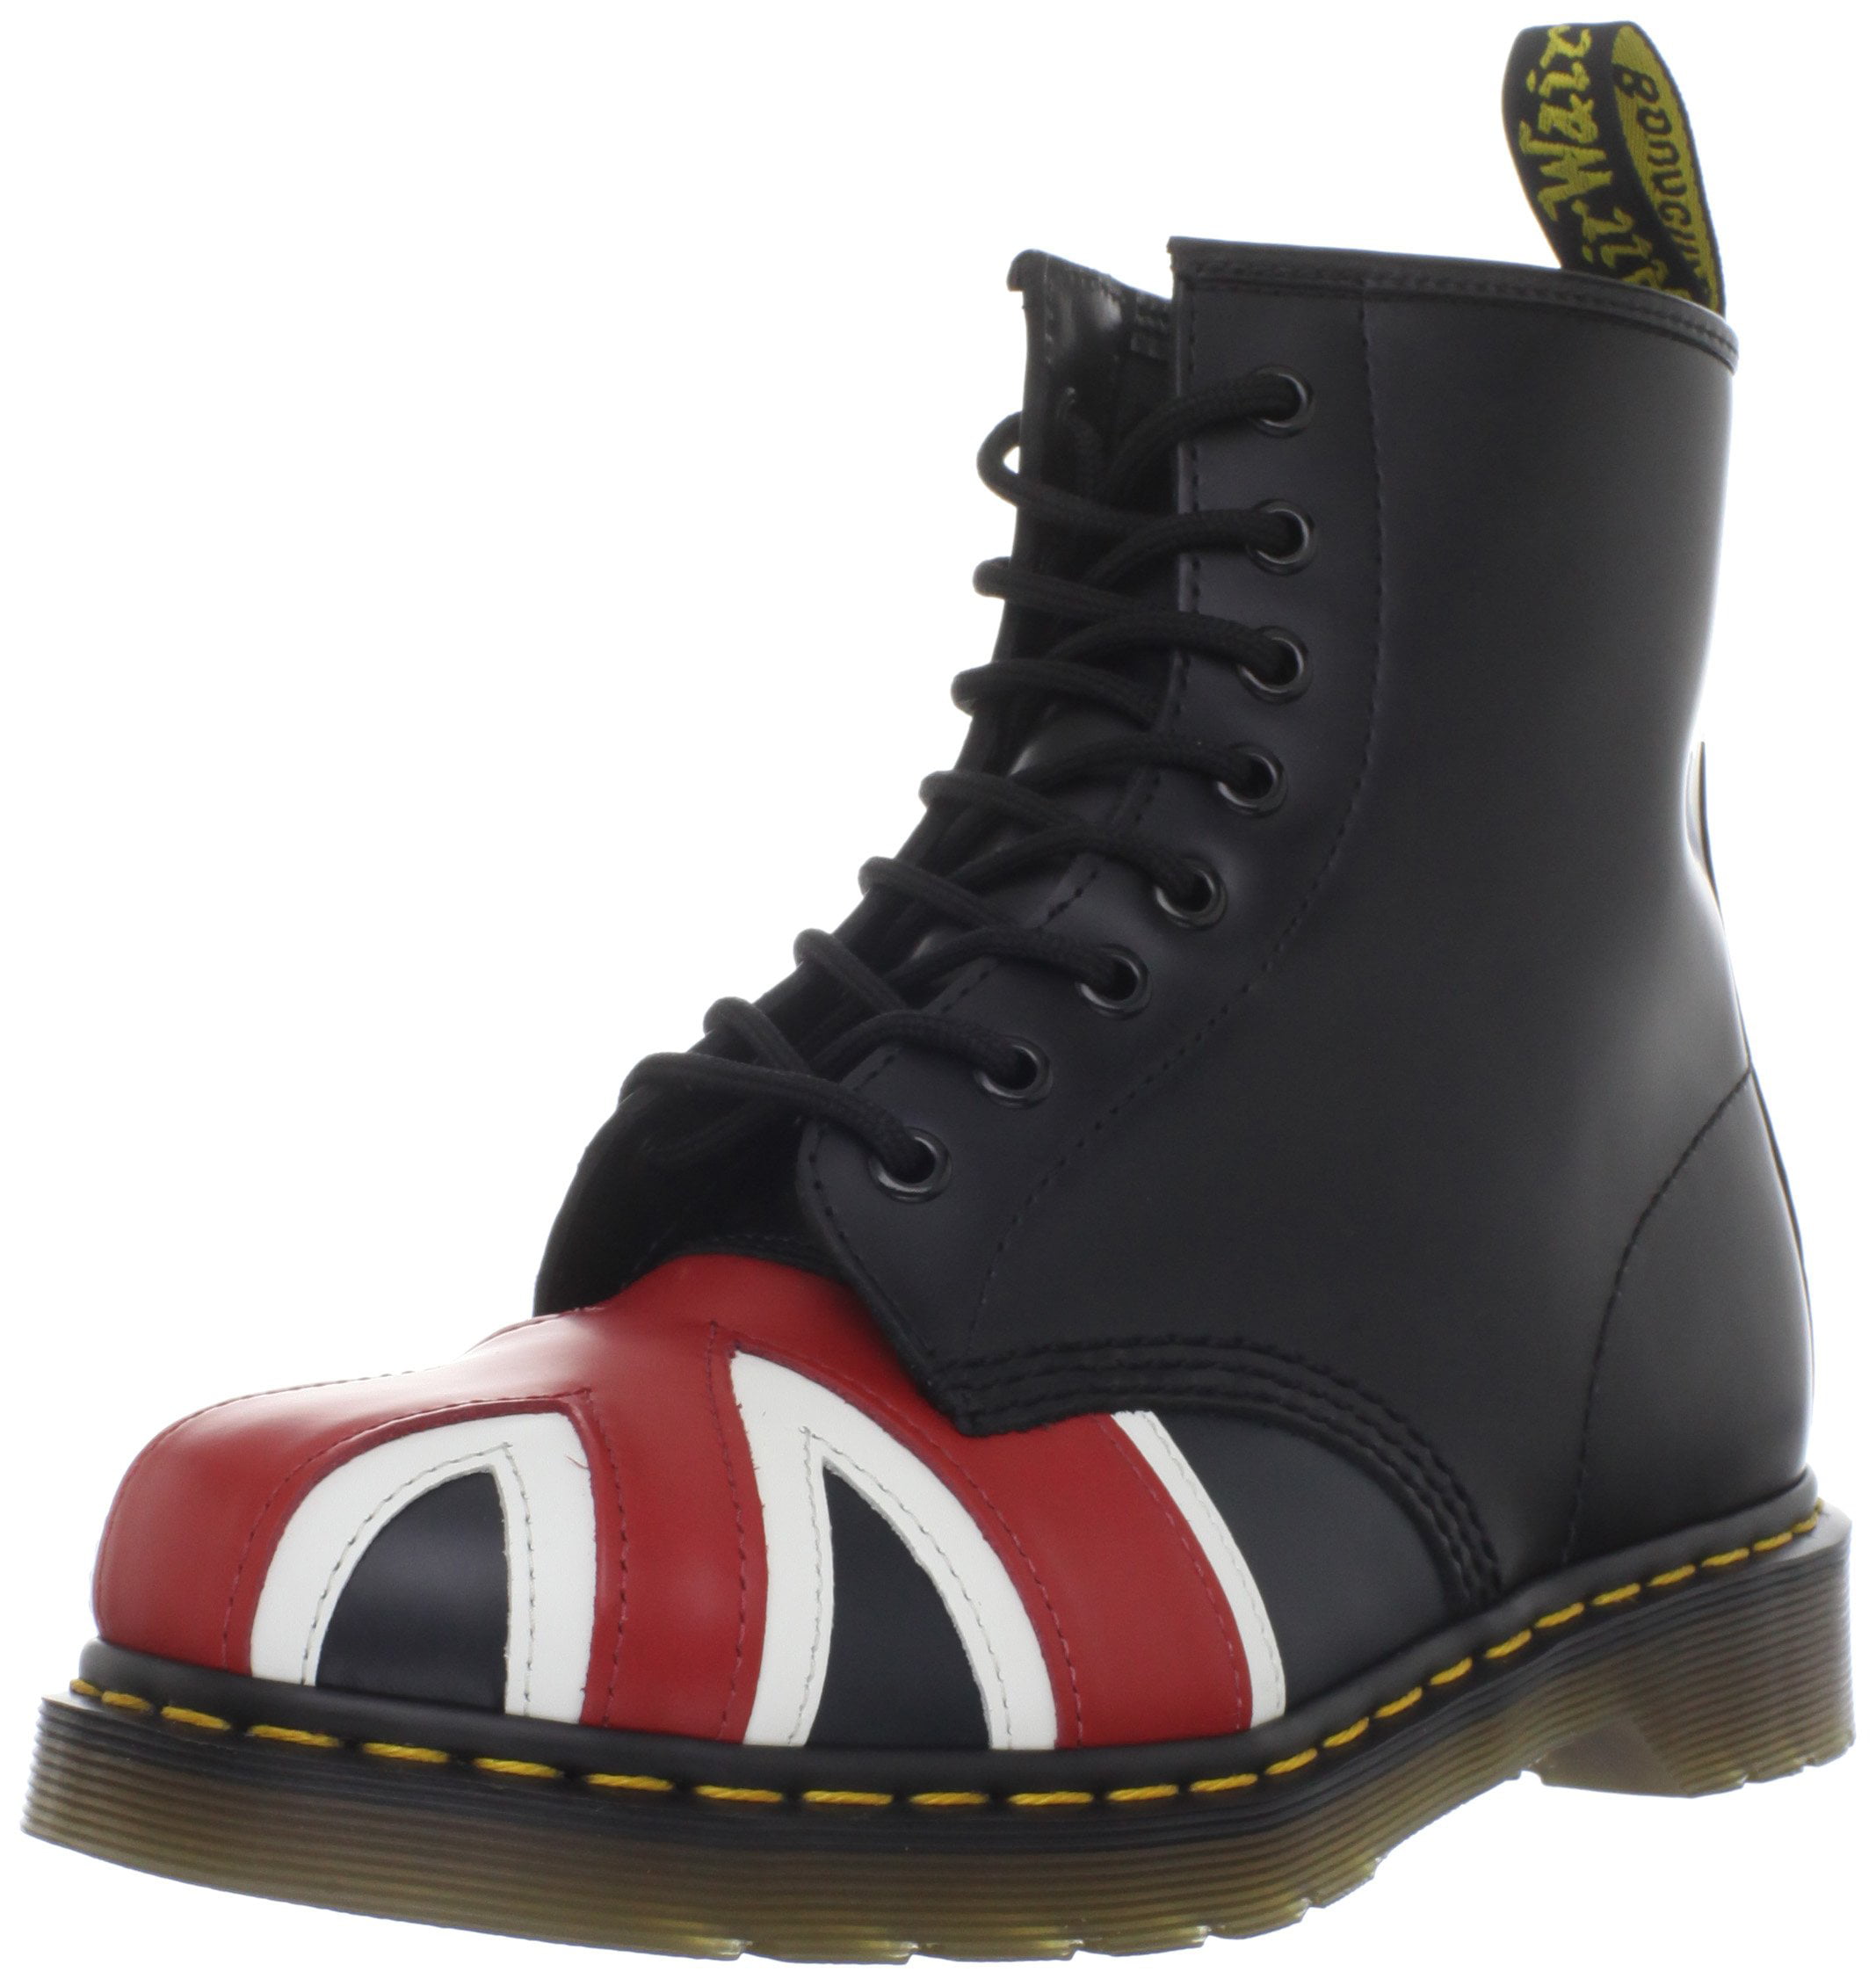 Dr Martens Union Jack 8 Eye Unisex Black Boots 10950001 US Size 5 and 6 Only 